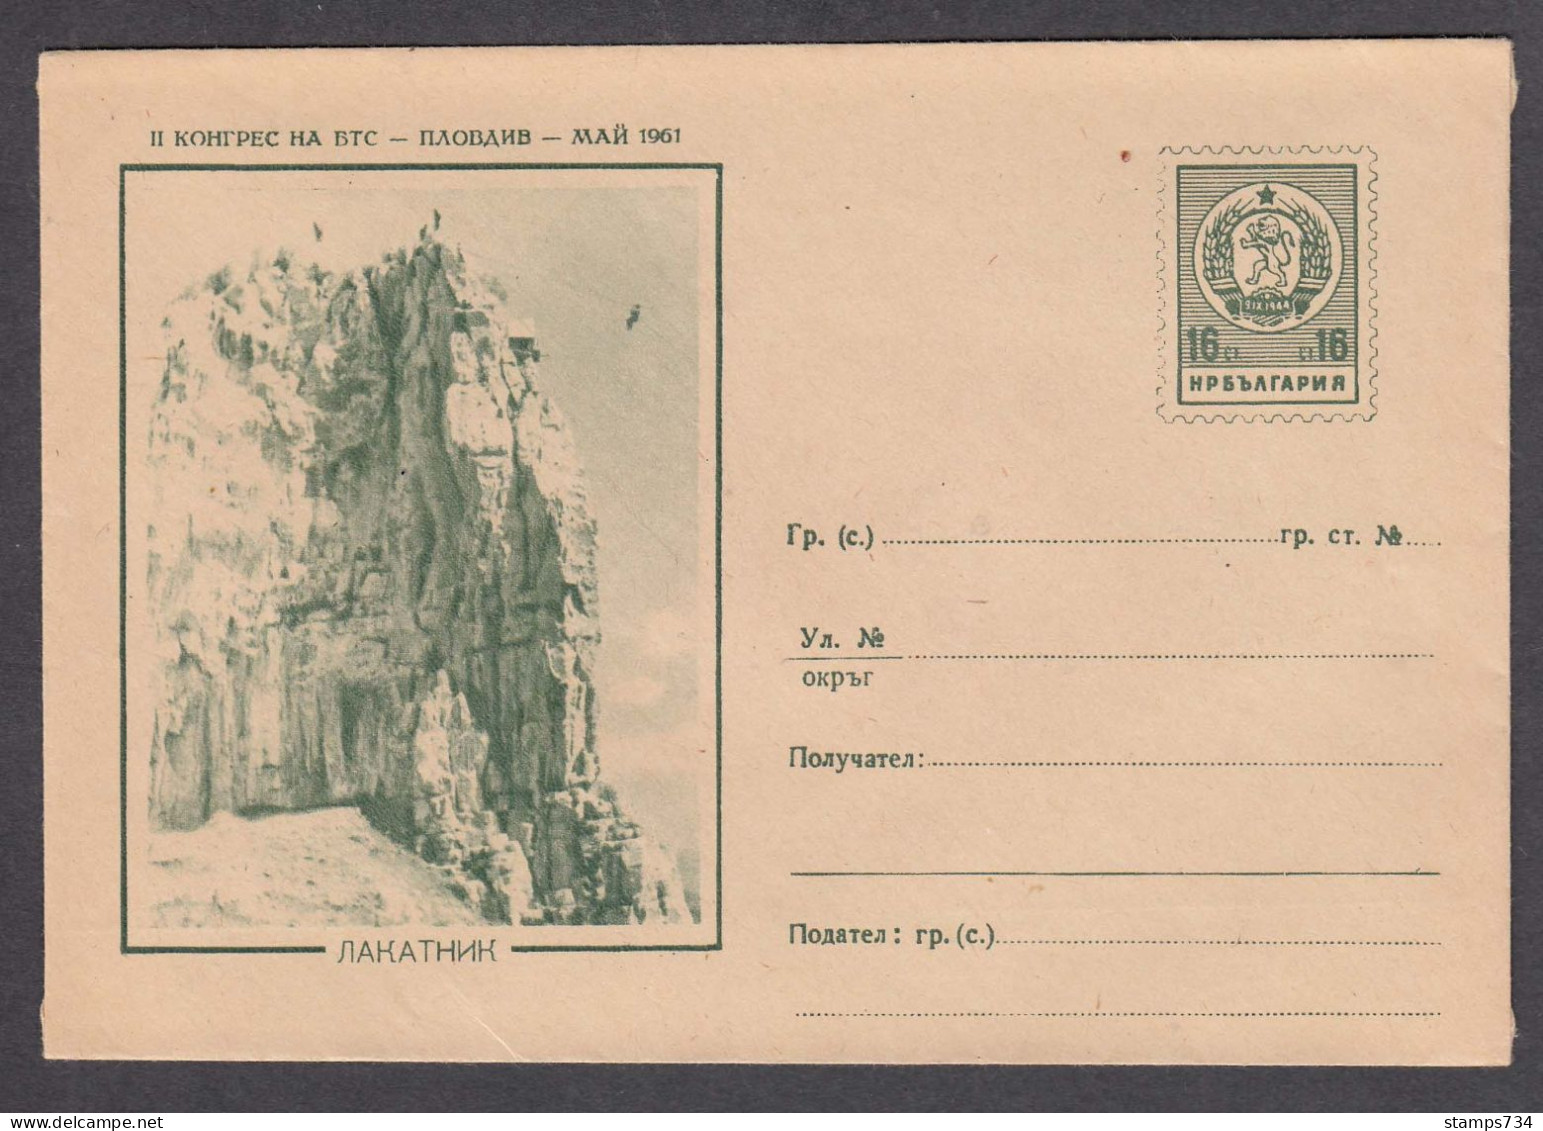 PS 273/1961 - Mint, 2nd Congress Tourists, LAKATNIK - Mountaineering, Post. Stationery - Bulgaria - Covers